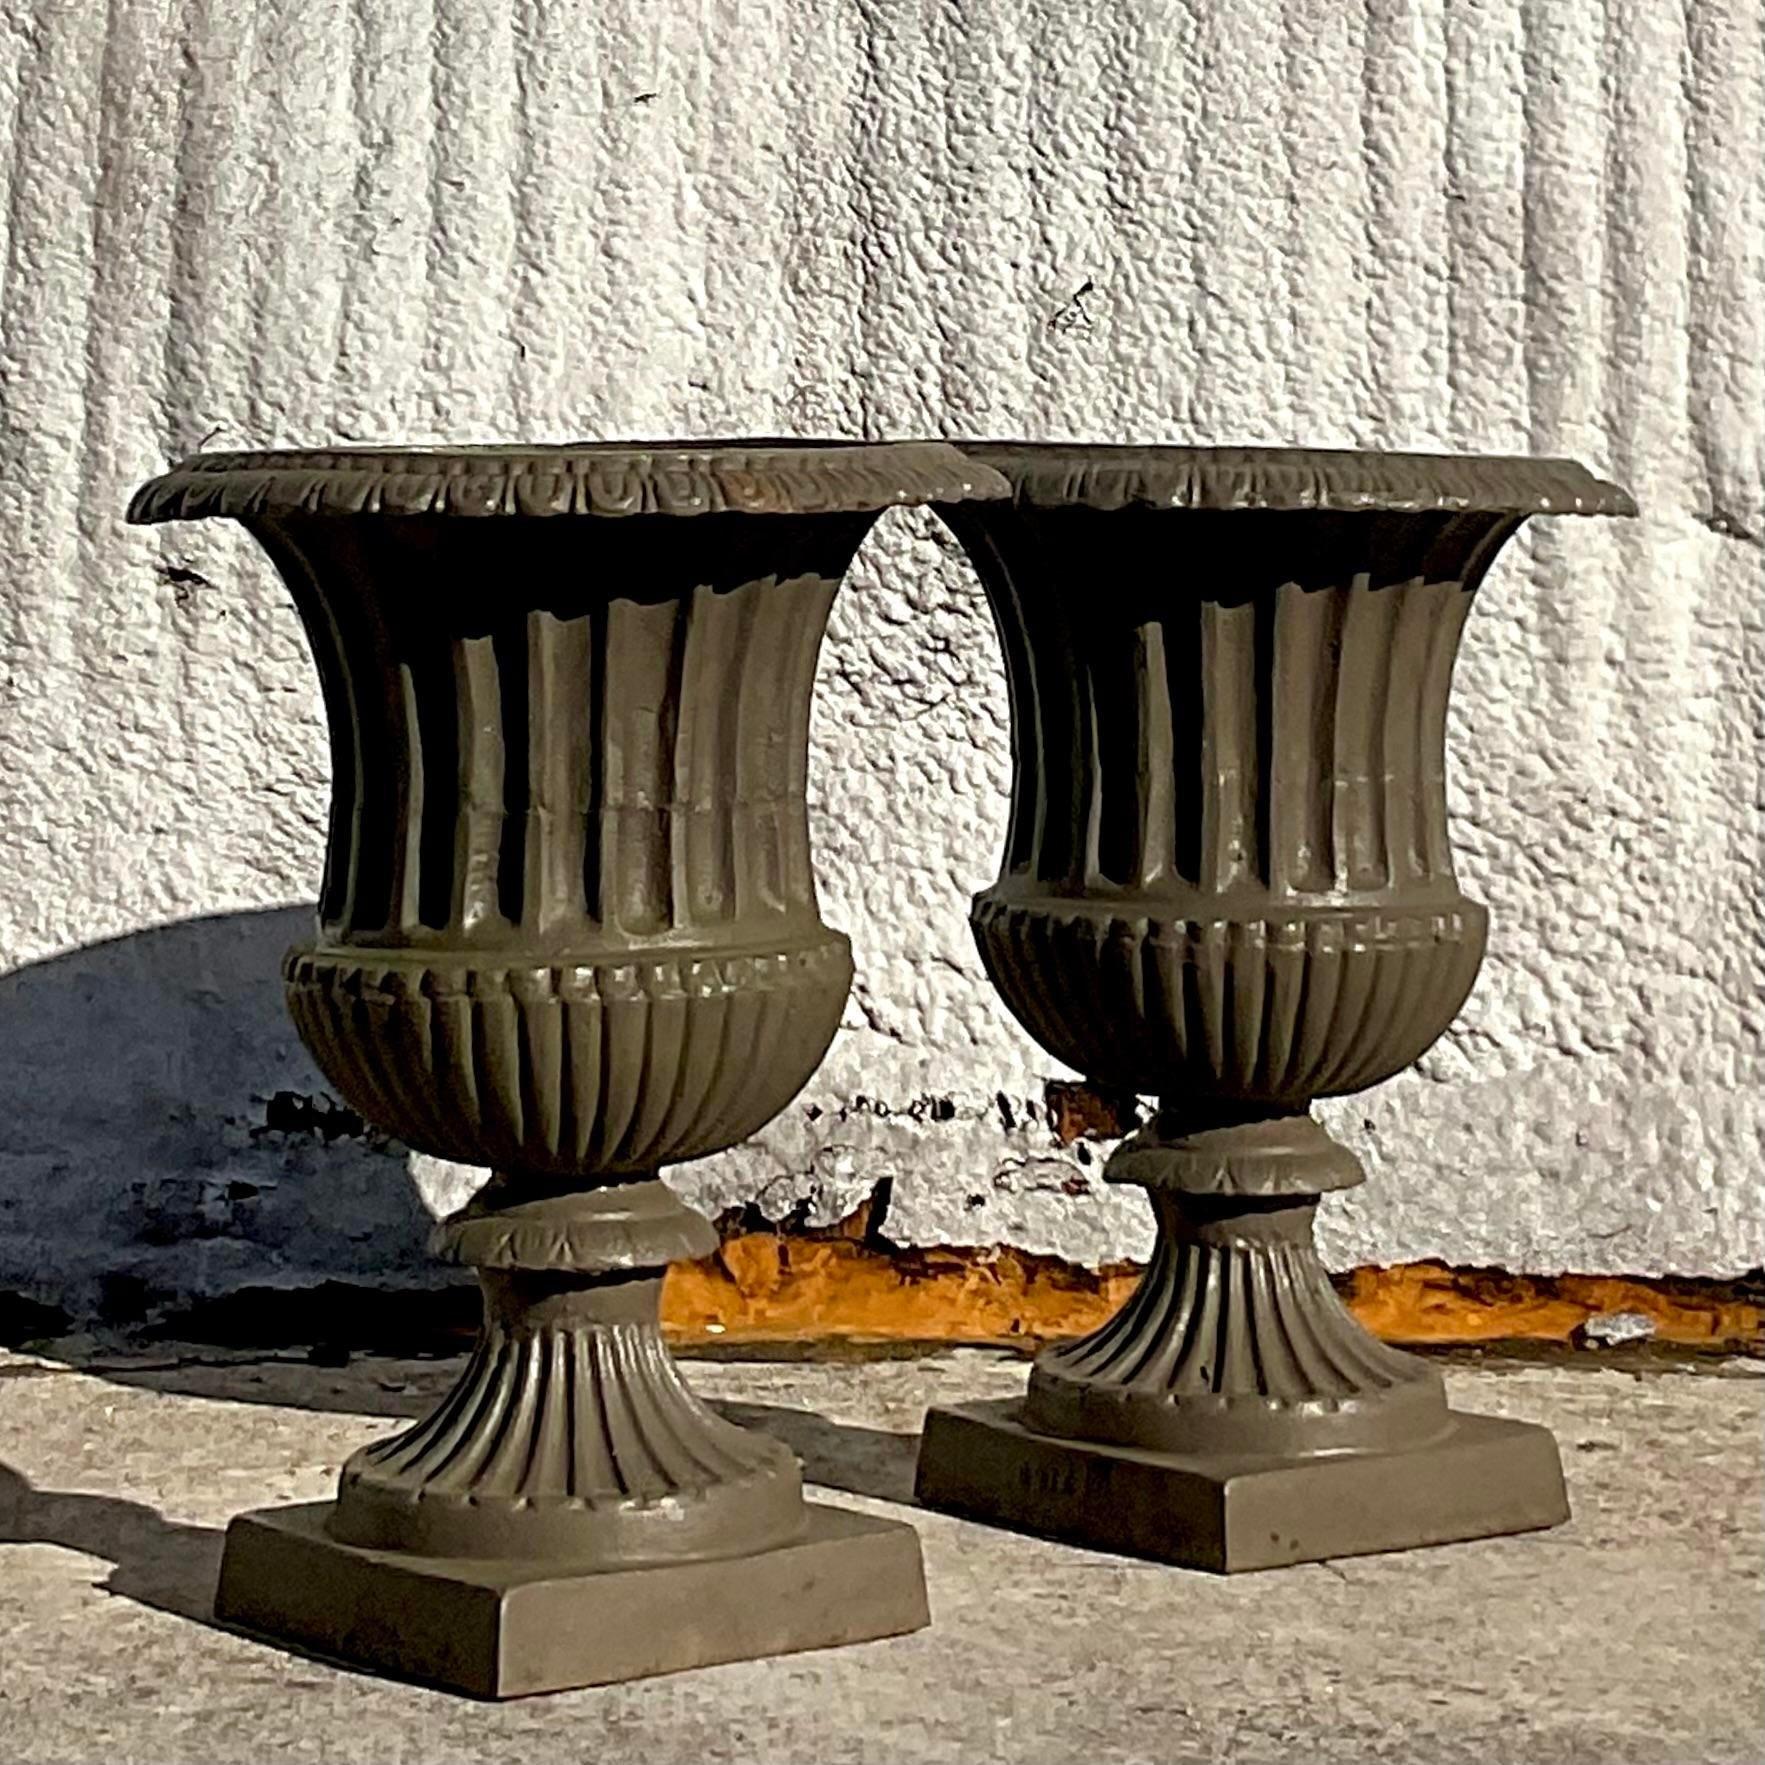 Vintage Mid 20th Century Boho Wrought Iron Urns - a Pair For Sale 3